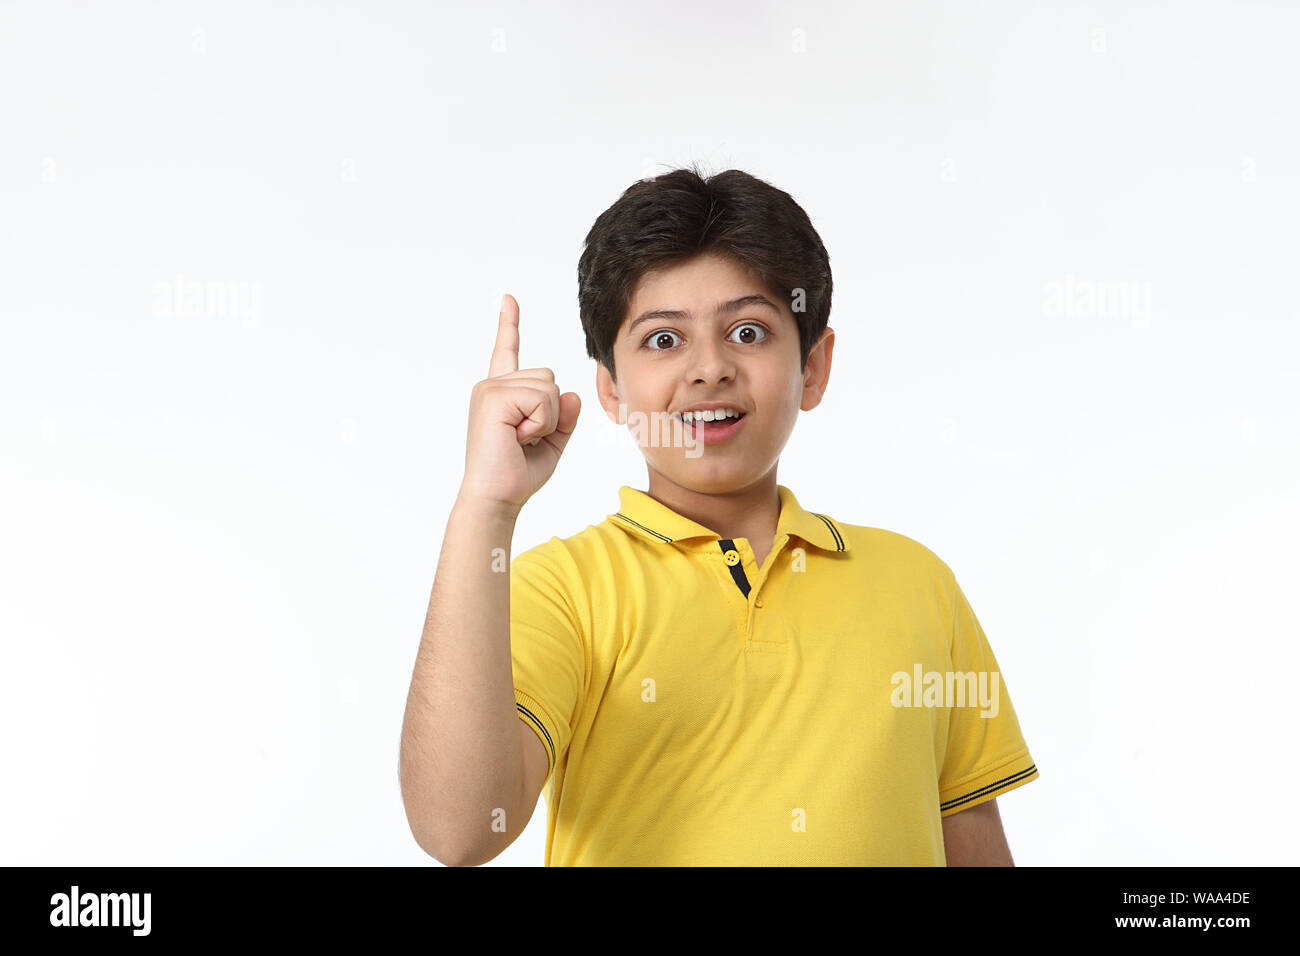 Boy standing and pointing upward Stock Photo